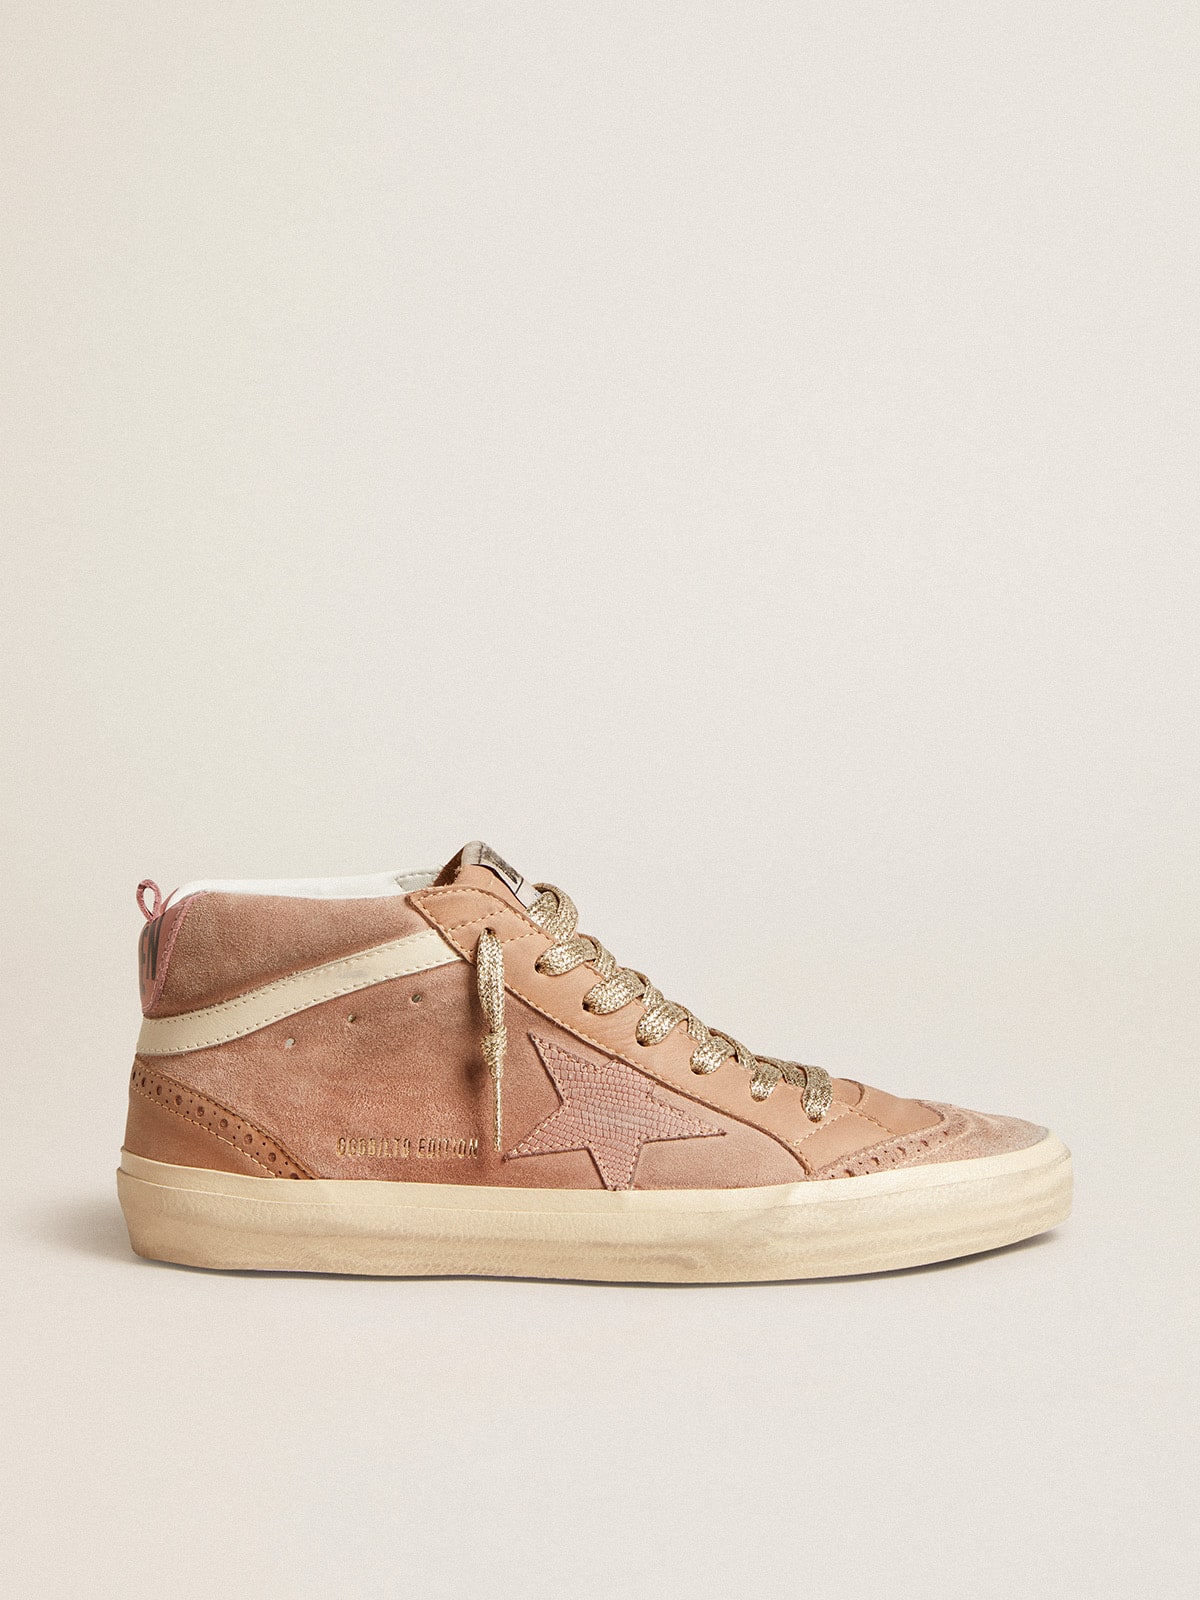 Women's Mid Star LTD in pink suede with pink lizard-print leather star